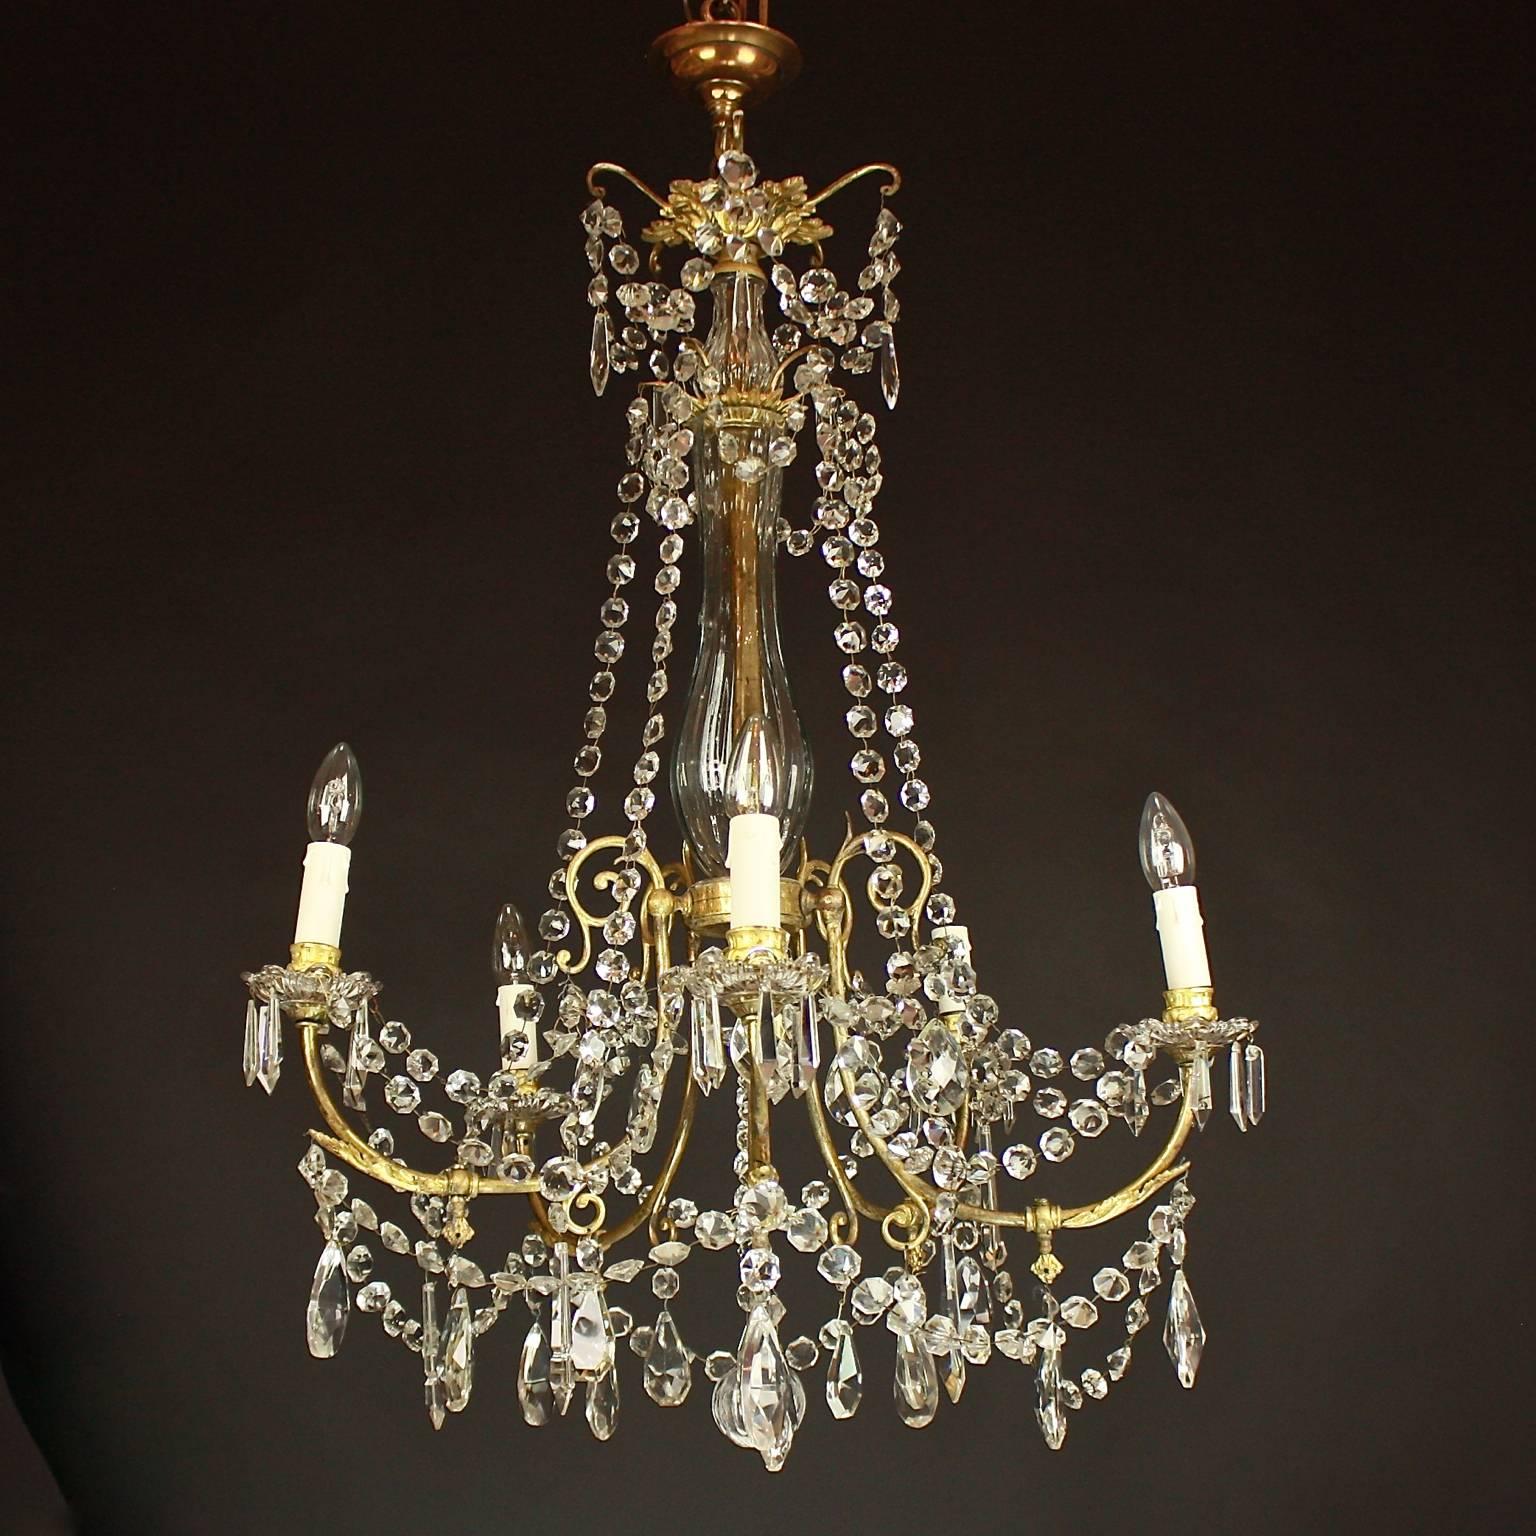 A 19th century Louis XV style gilt bronze and cut-crystal chandelier, with a facetted multi-baluster stem, a vase-d'enfilade, the nozzles and drip pans on scrolled branches with supporting foliate, with suspension cut-crystal chains to the corona.